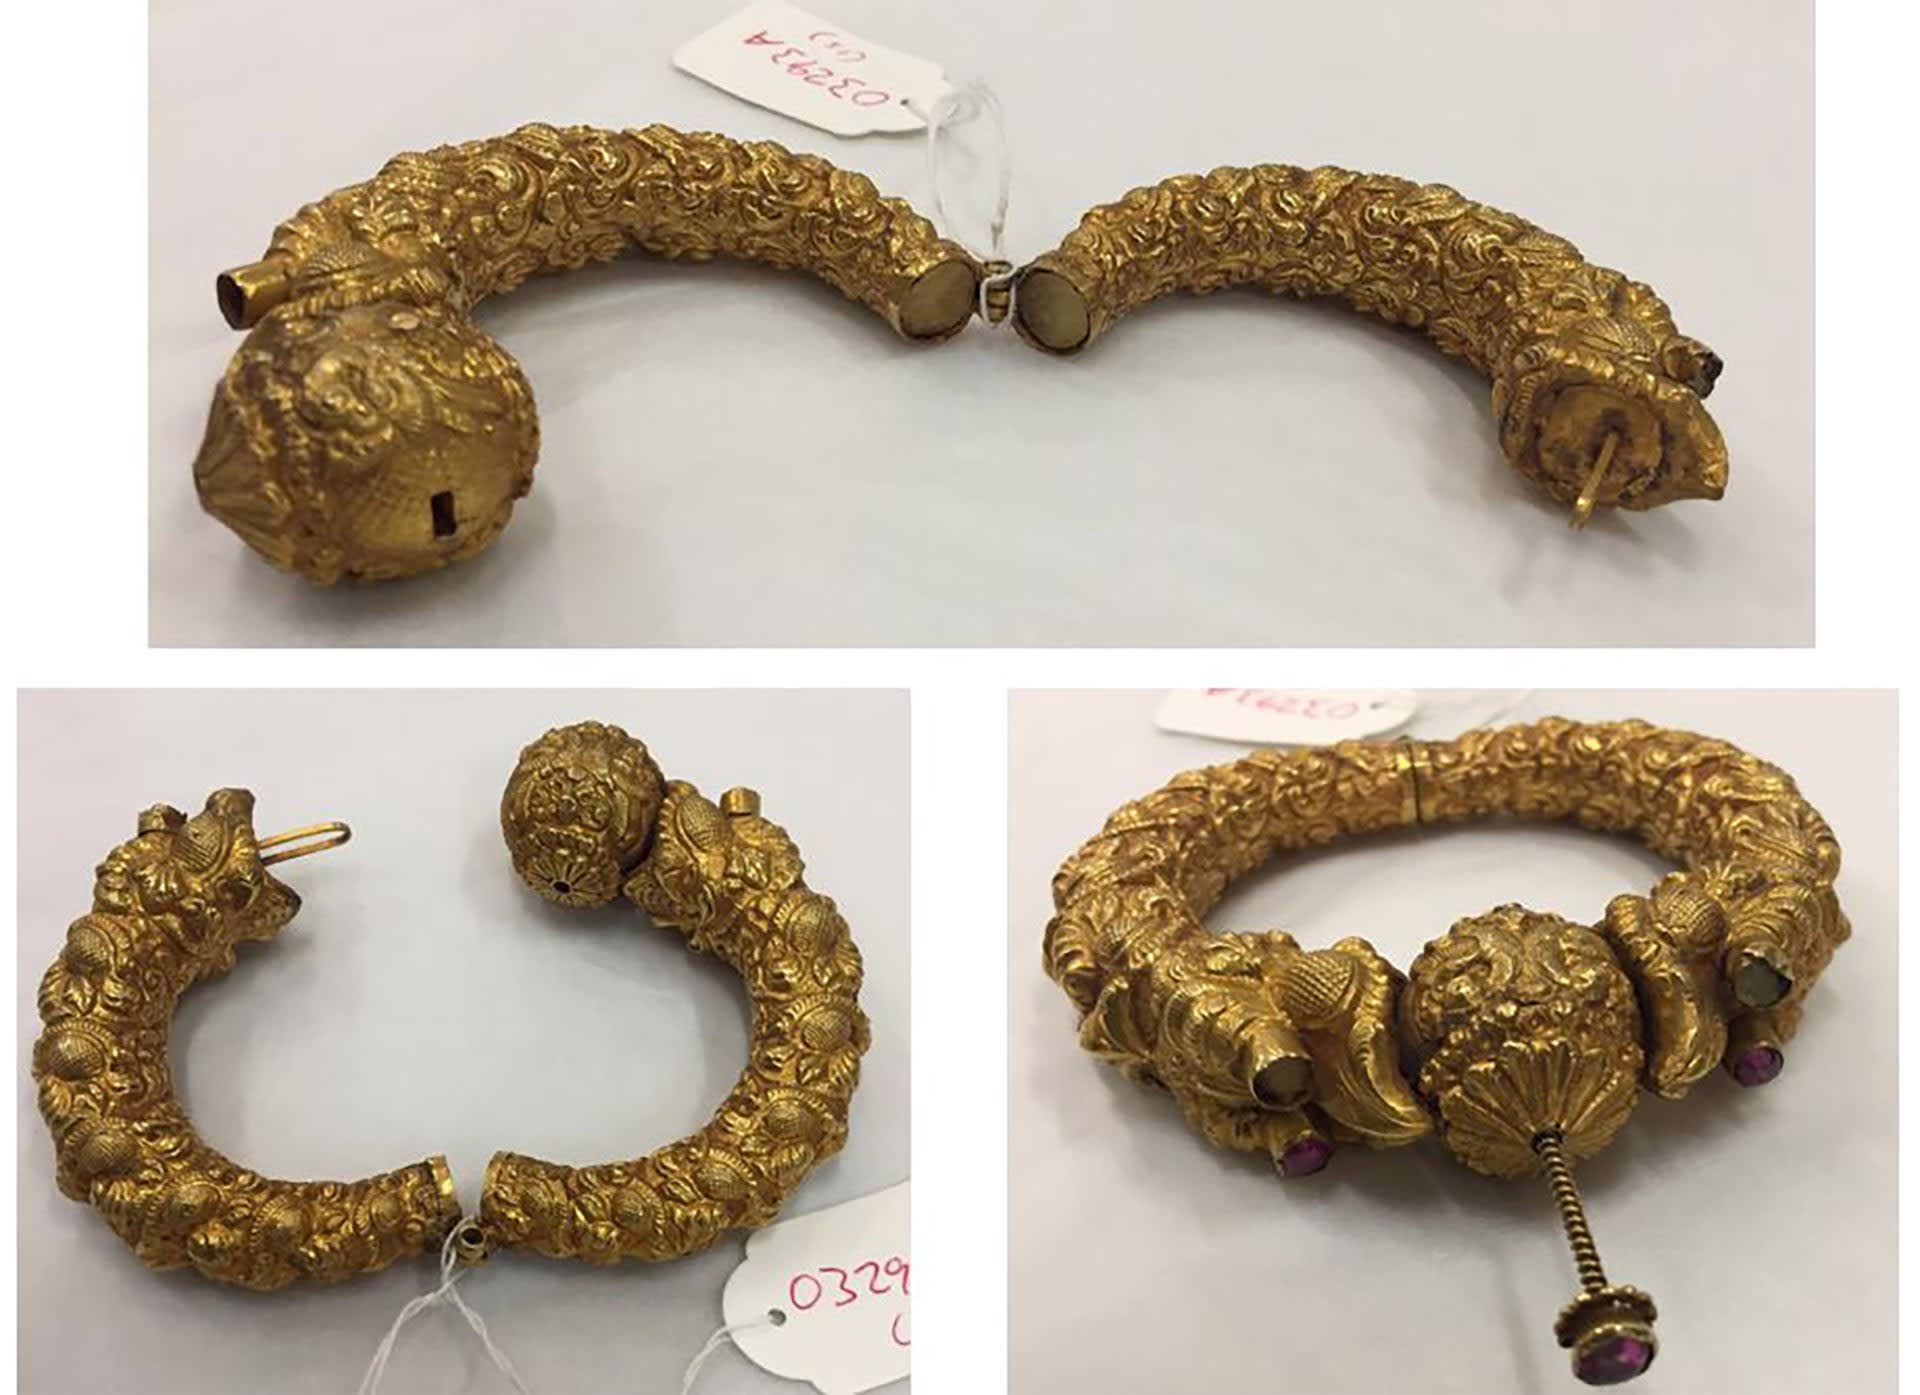 Snapshots of the bracelet in the V&A Collection